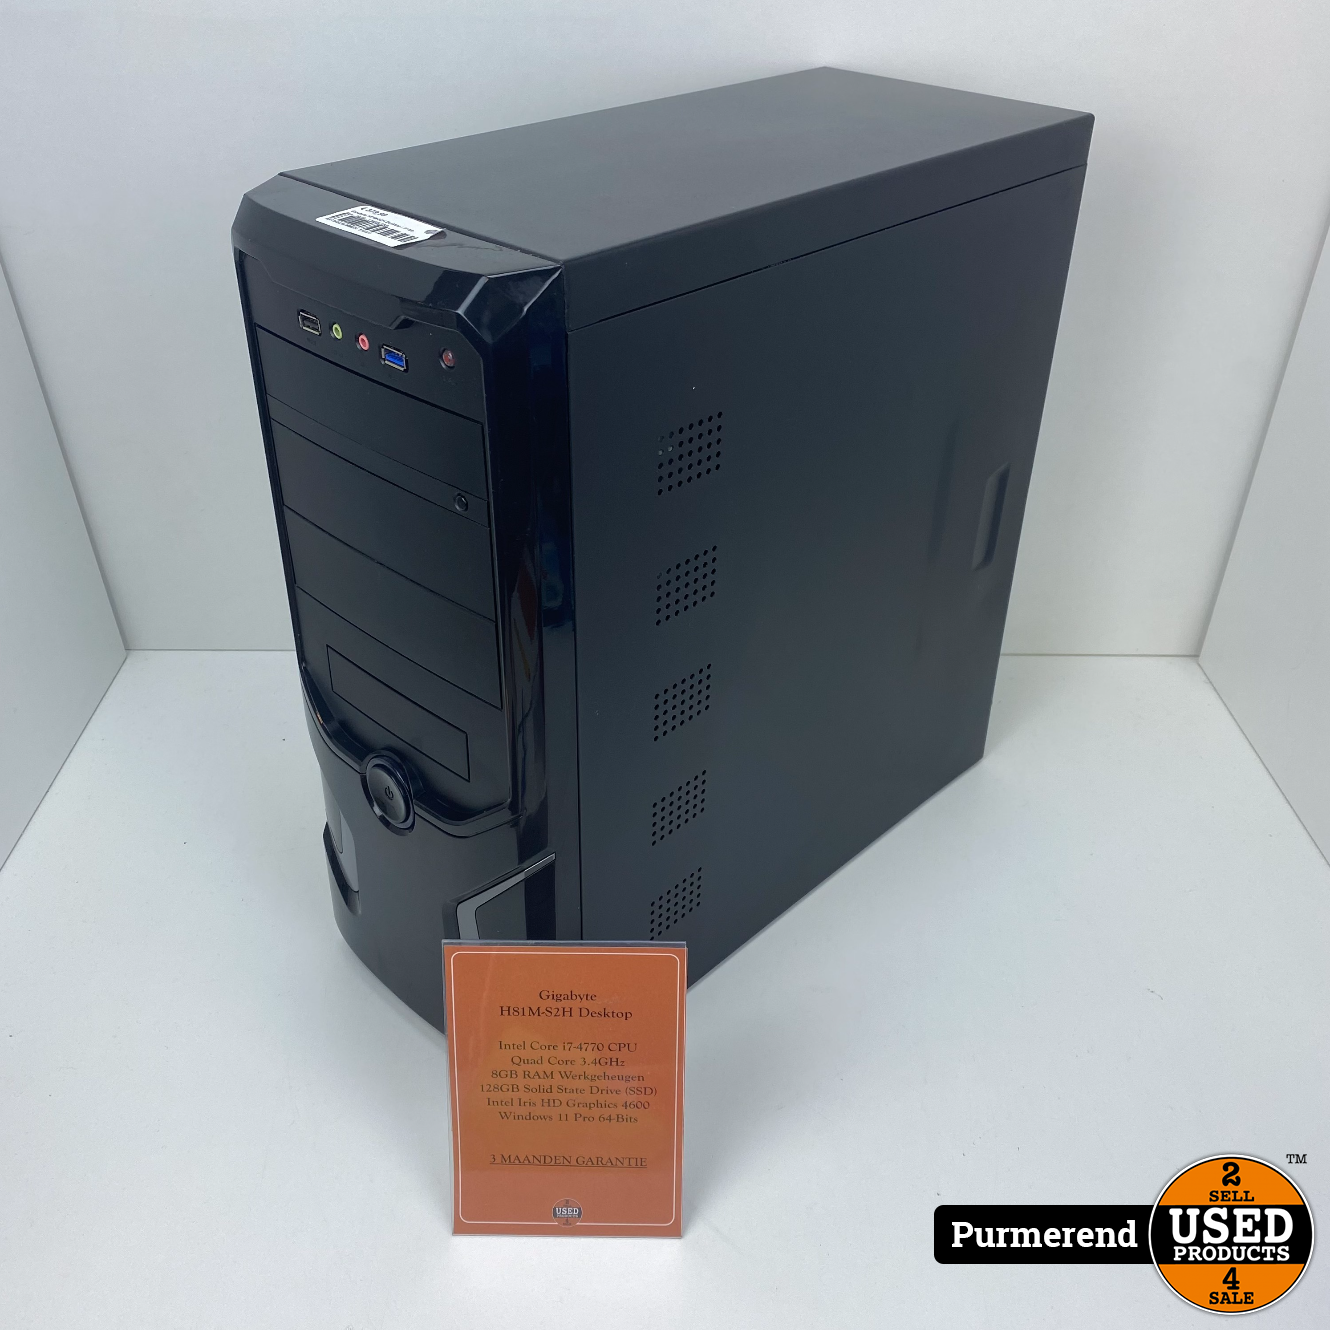 sneeuw ophouden Kilimanjaro Gigabyte H81M-S2H Desktop | i7 4th Gen - 16GB - 128GB SSD - Used Products  Purmerend